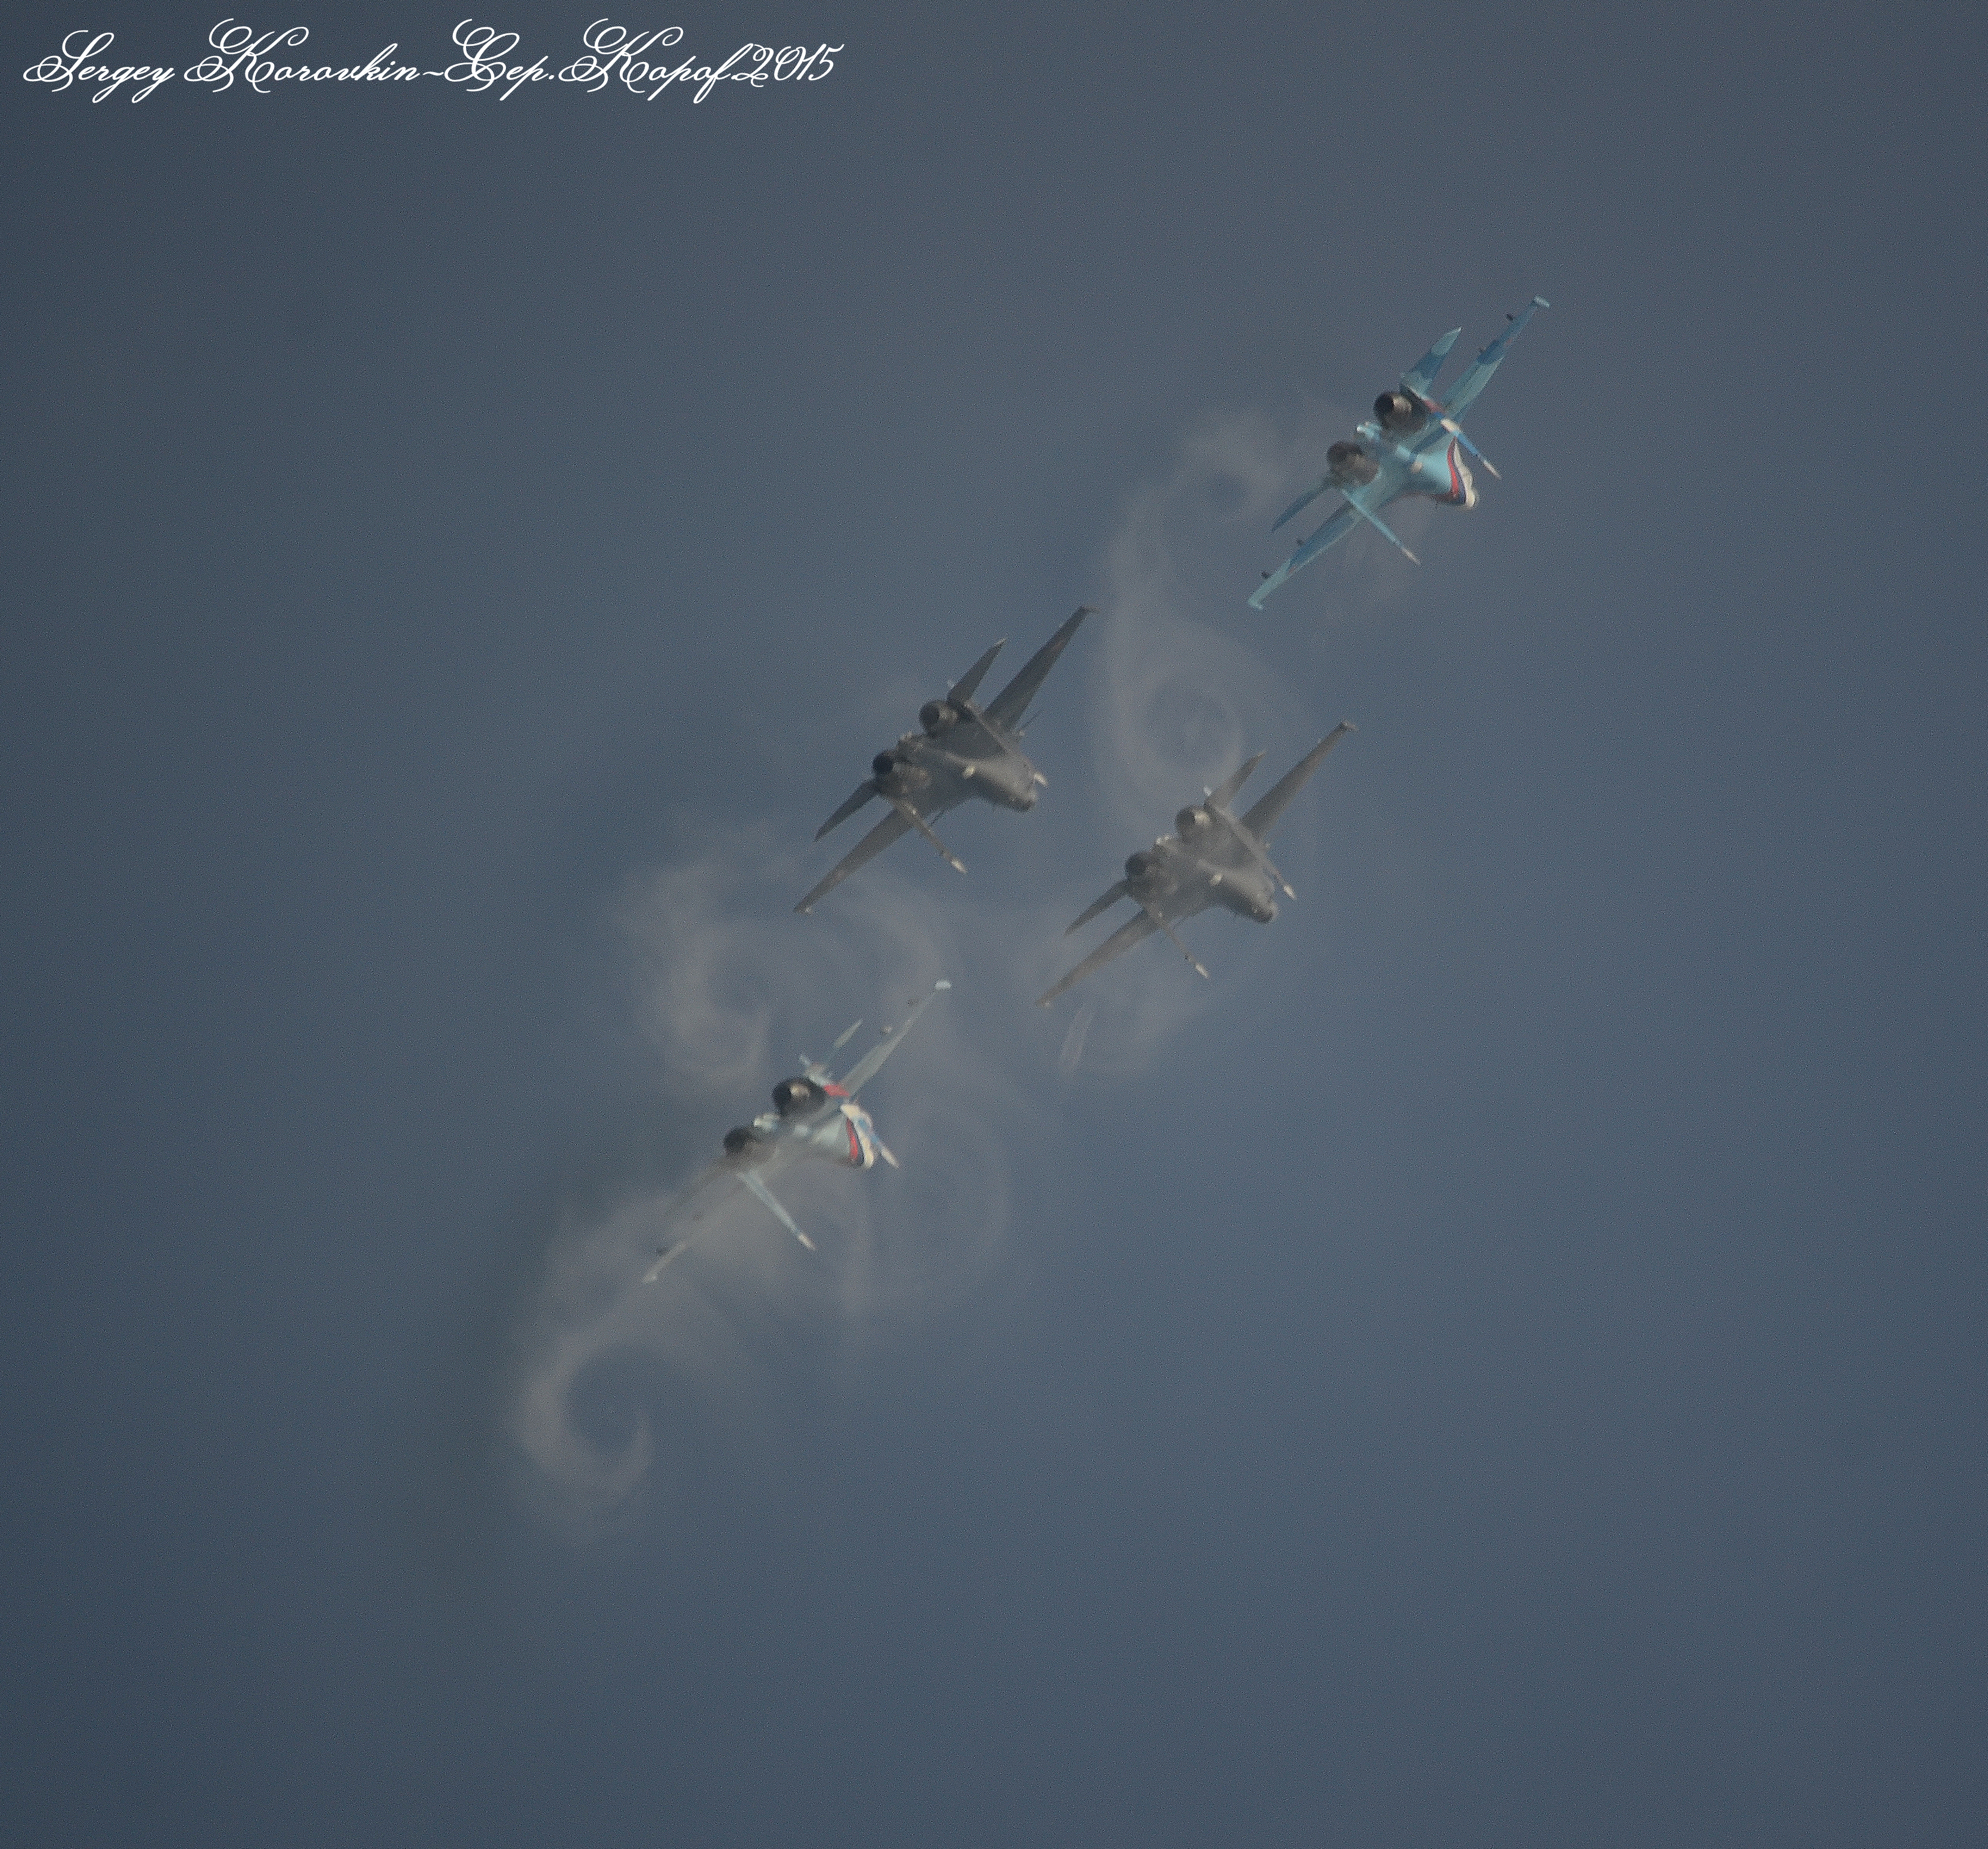 MAKS-2015 Air Show: Photos and Discussion - Page 3 0_17bdb2_caefba42_orig